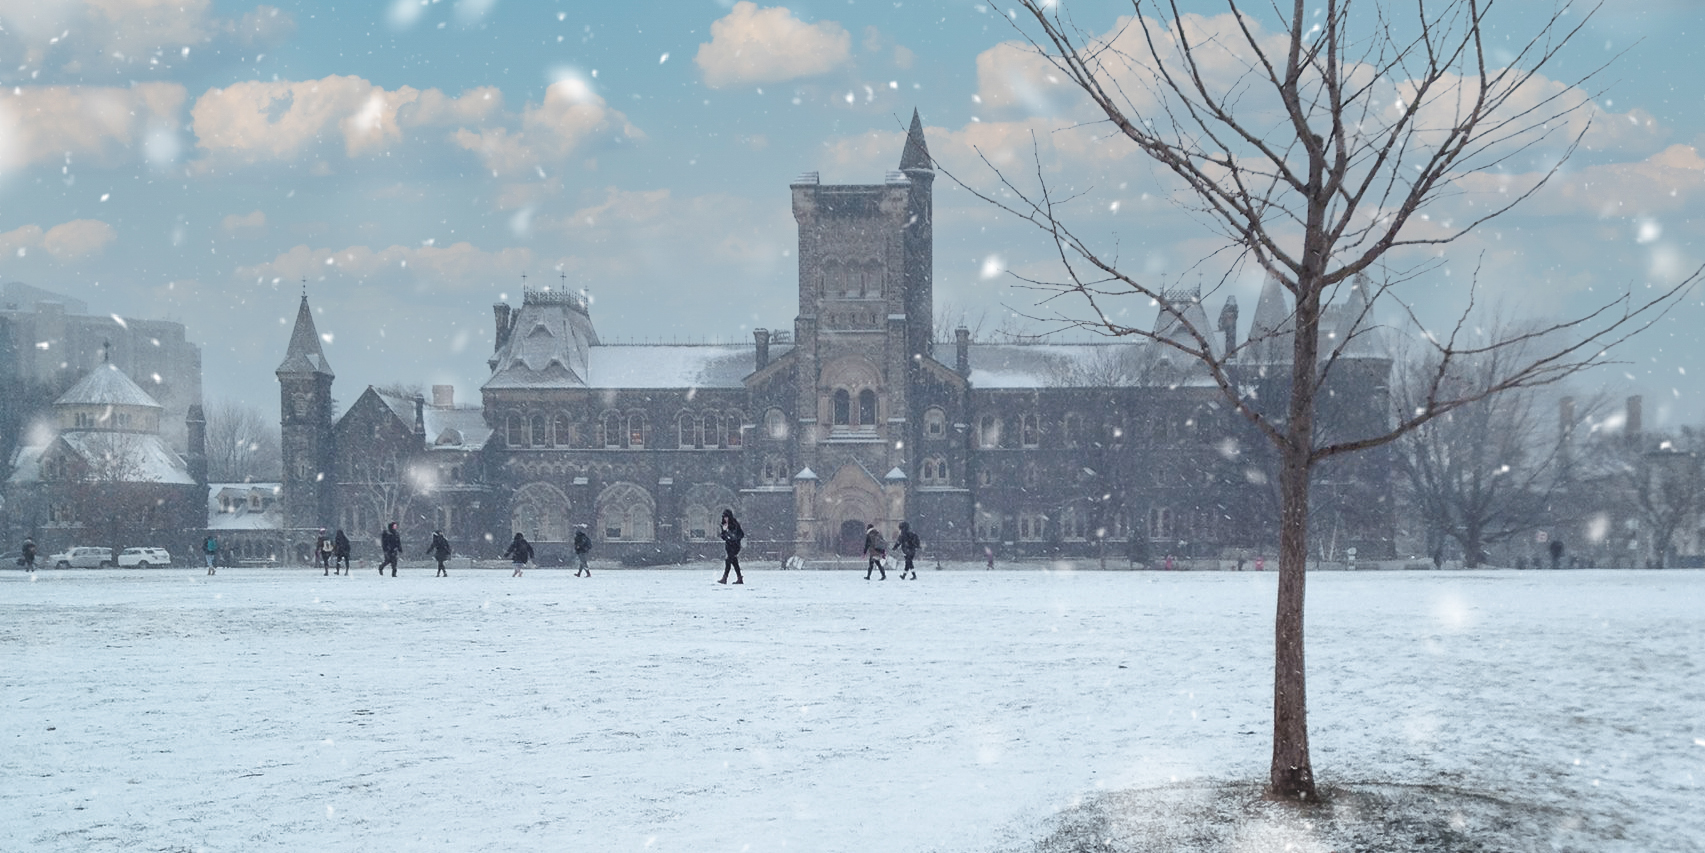 Kings College in the Snow